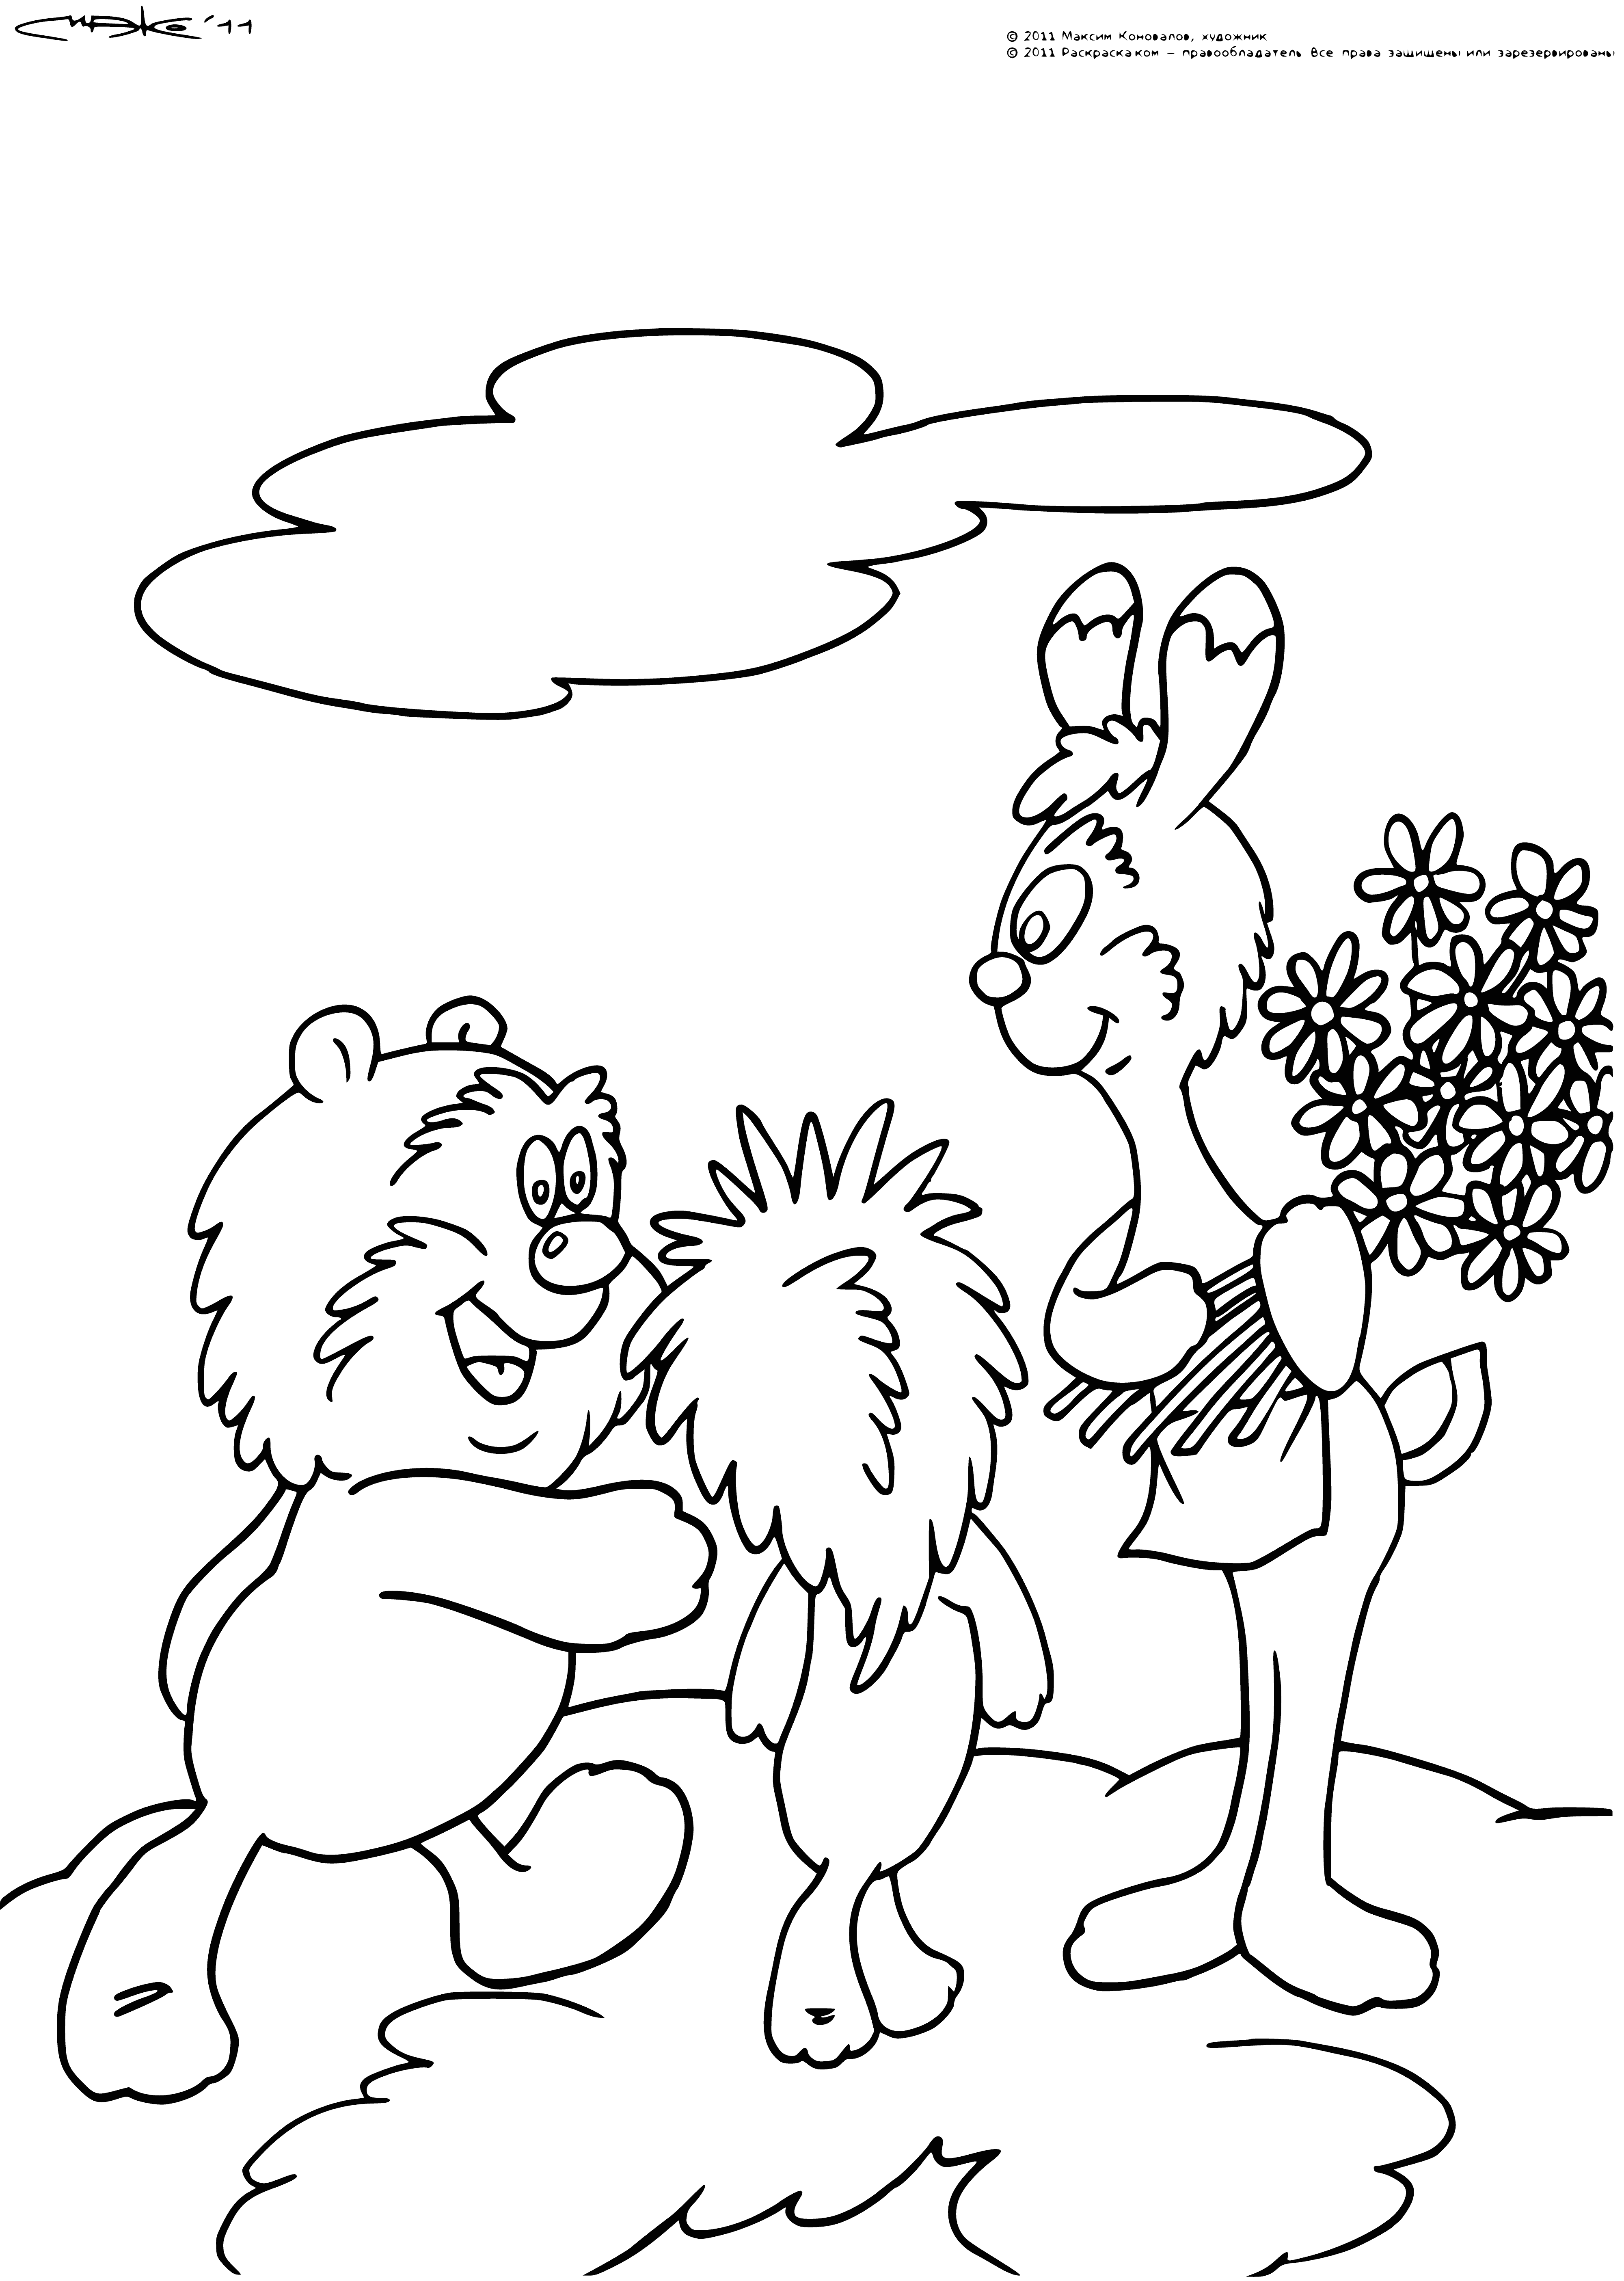 3 friends—beaming hedgehog w/ flower, carrot-holding rabbit, hug-happy bear—are all smiles in the coloring pic.